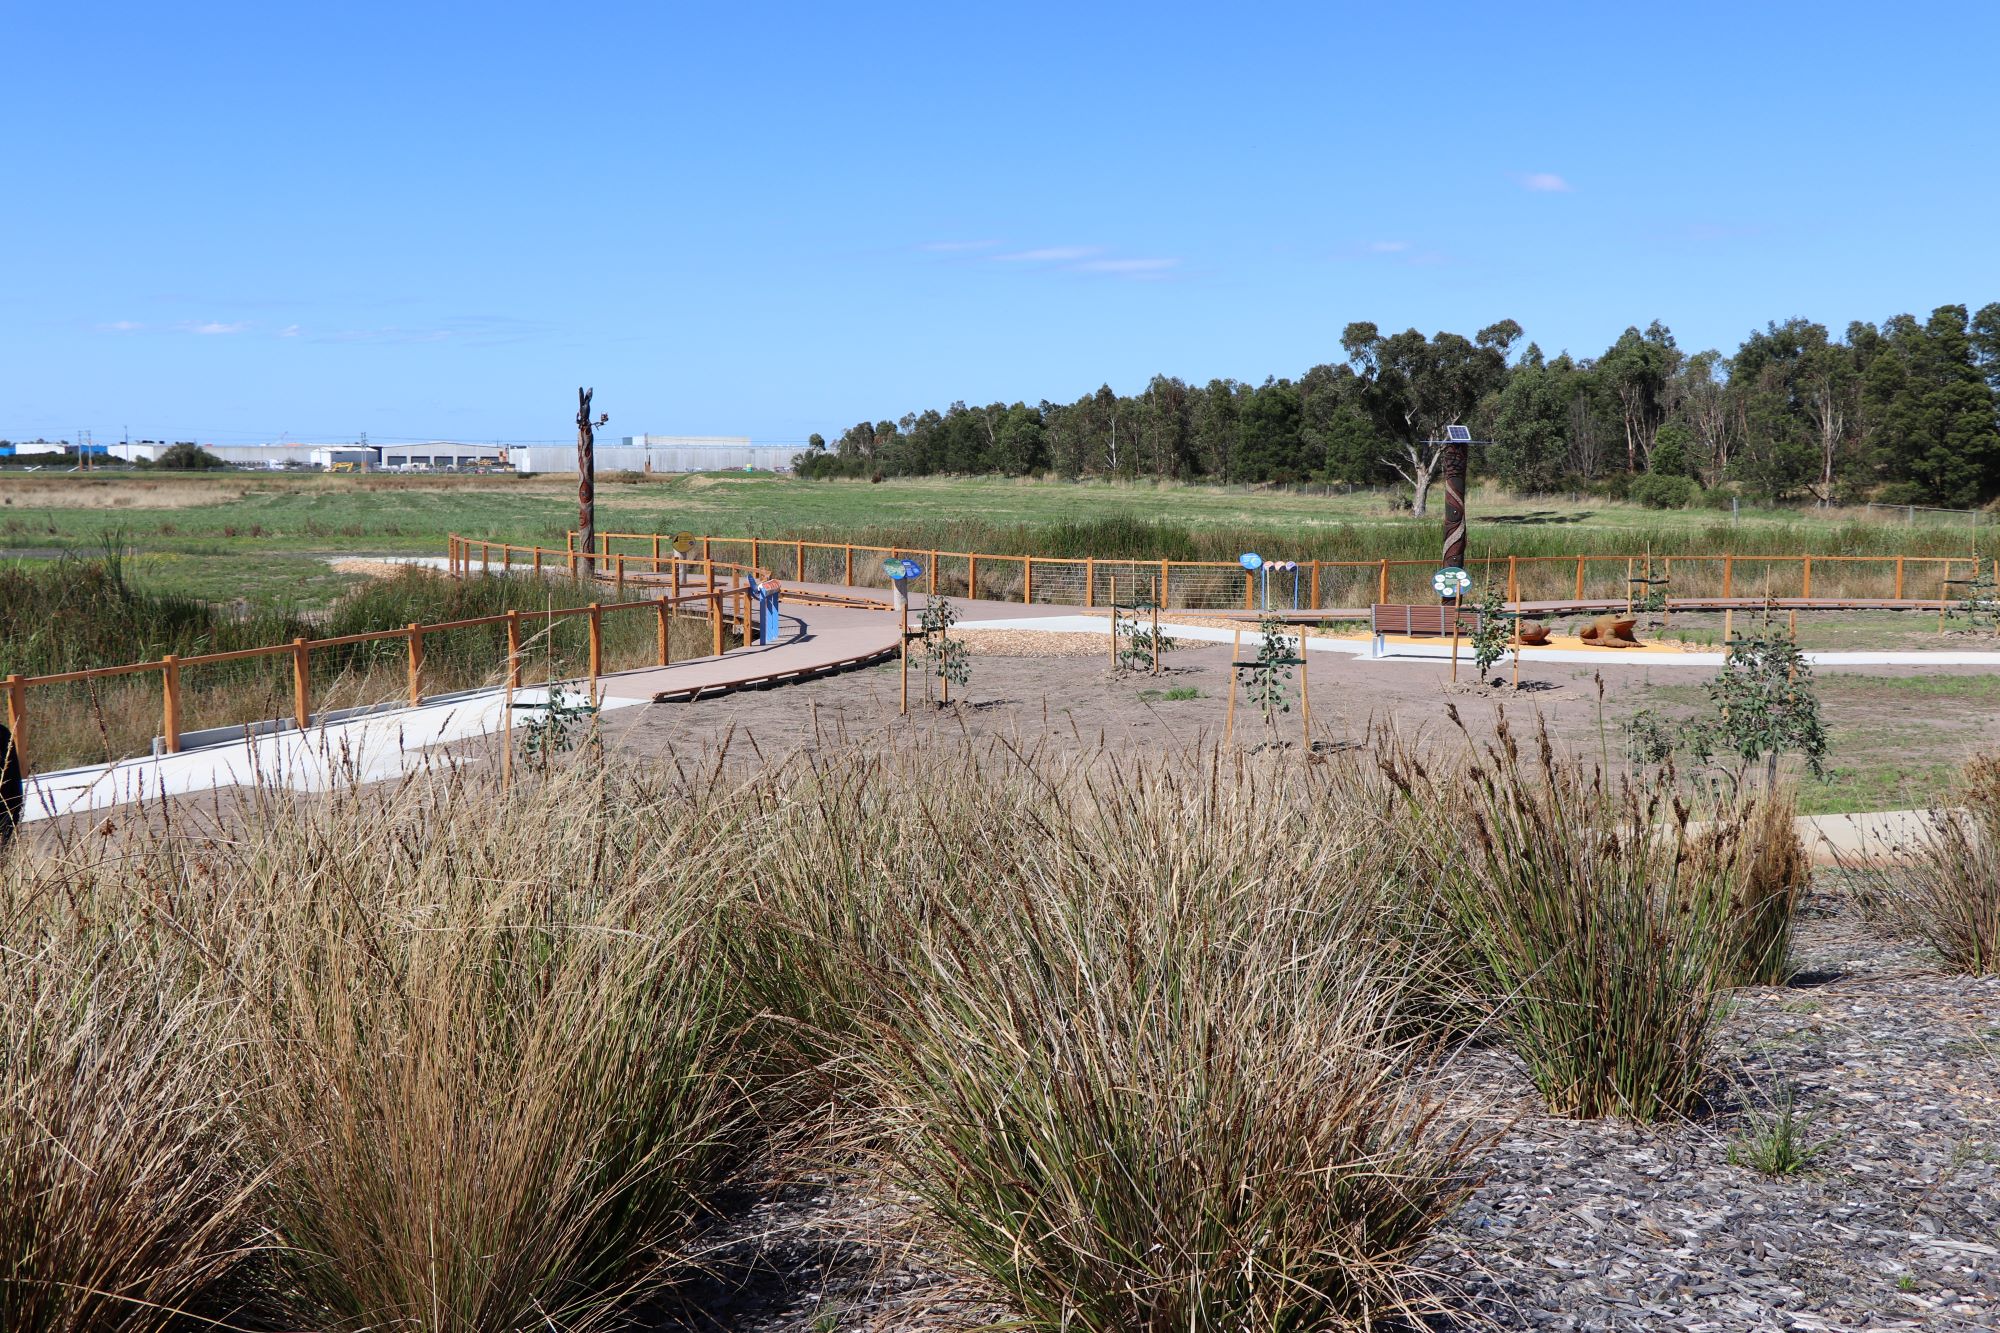 Overview of the Deep Creek Reserve wetland wonder project with paths, board walk and educations signs